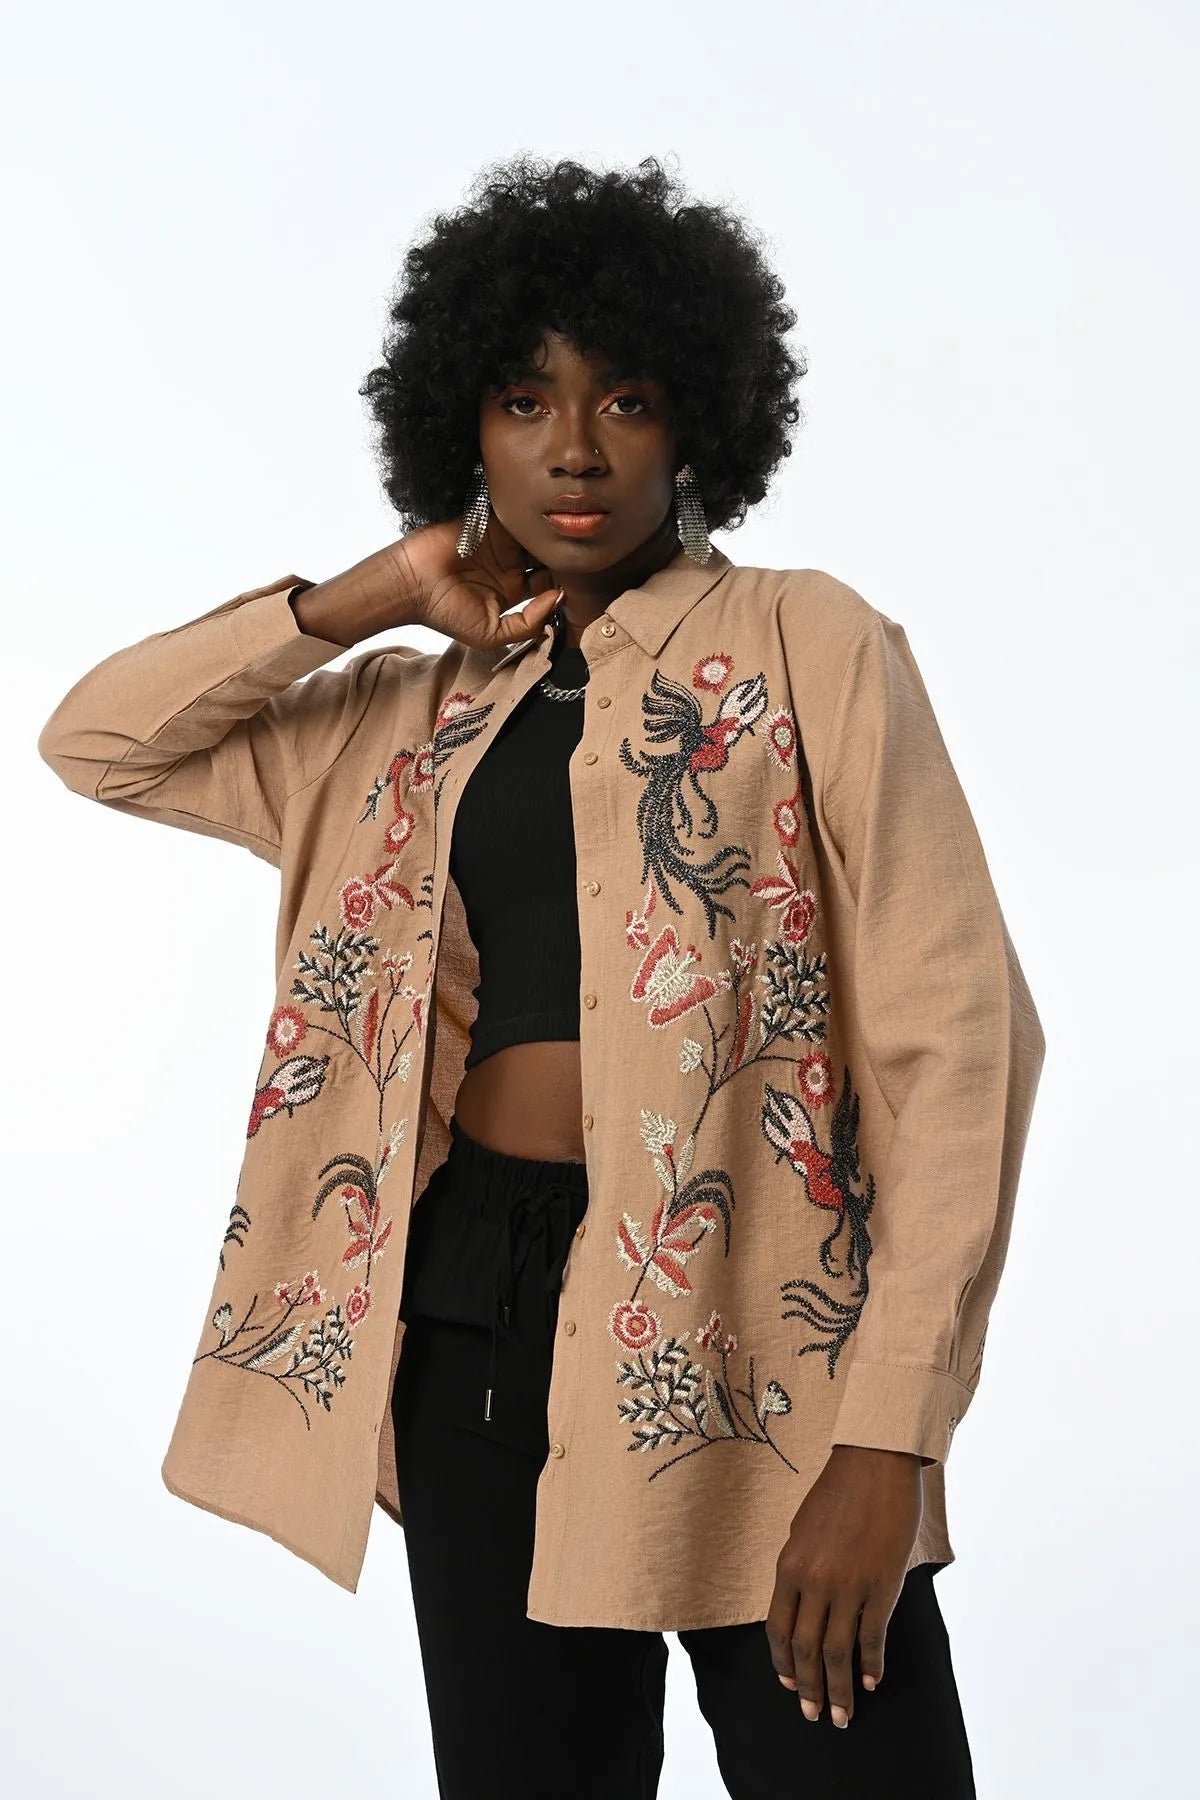 WOMEN'S OVERSIZE SHIRT WITH EMBROIDERY ON THE FRONT - Lebbse